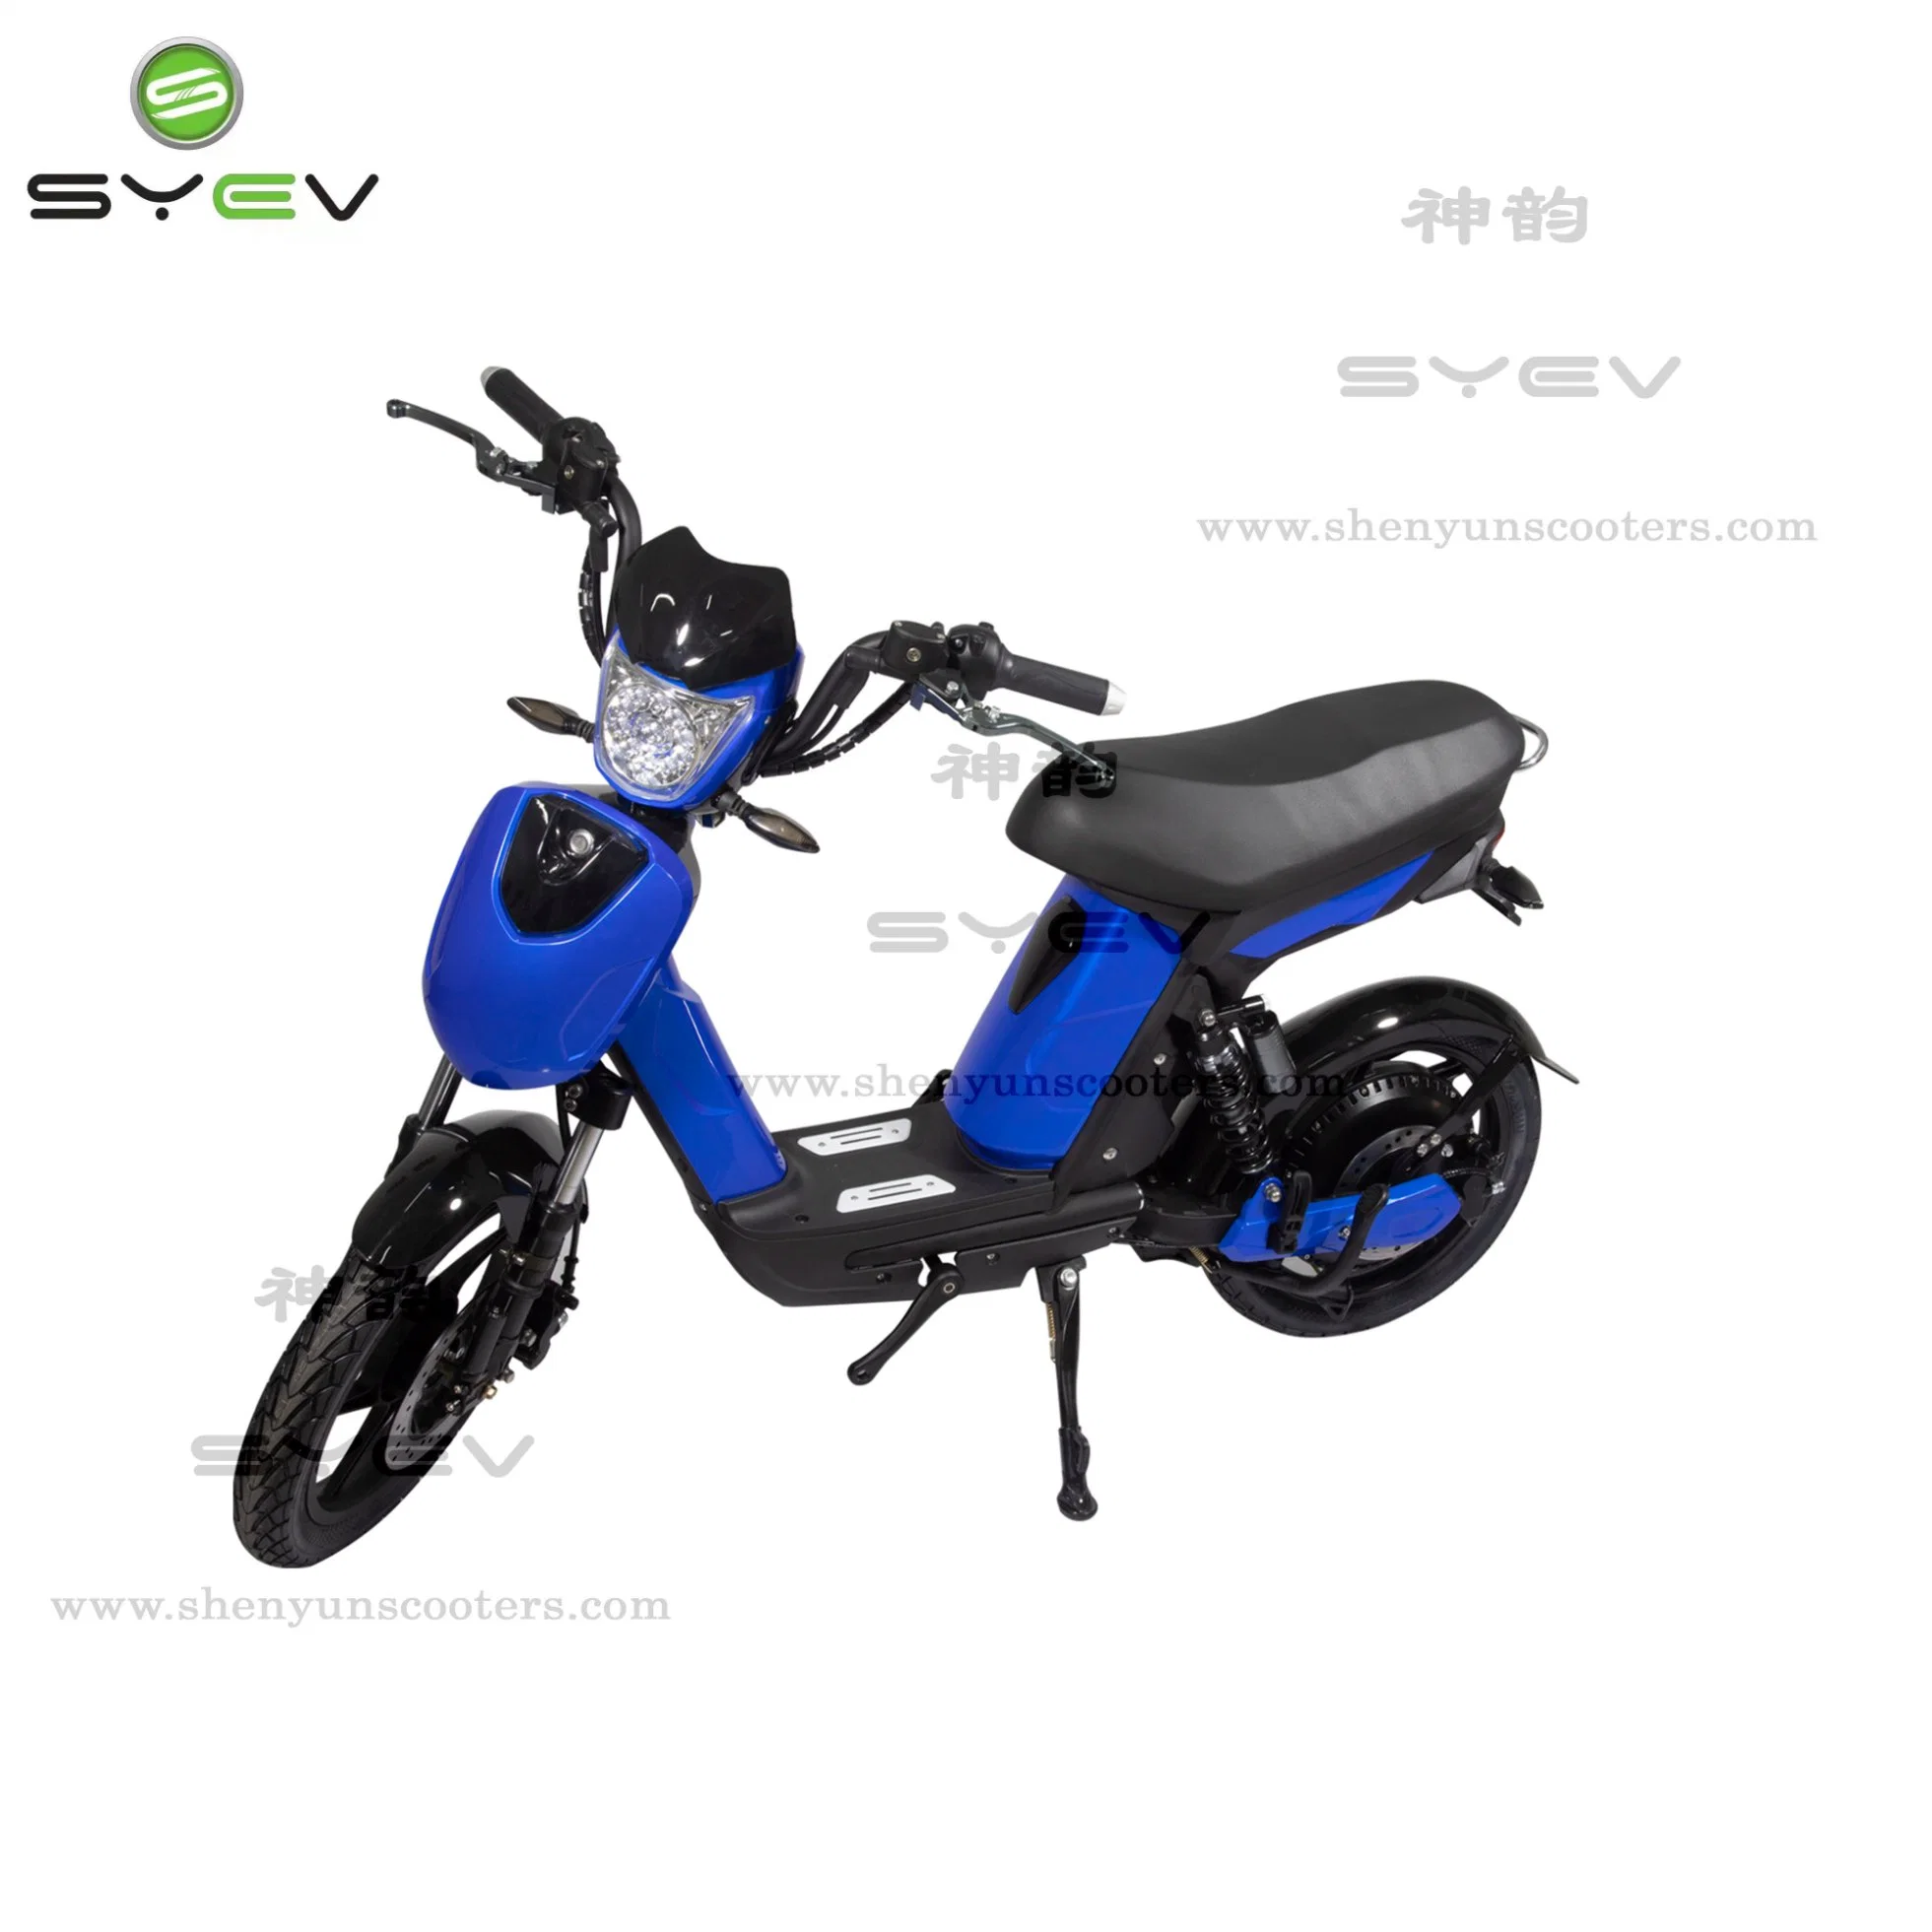 Syev EEC/CE Certification Electric Motorcycle Scooter City Moped E-Bike for Wholesale From Wuxi Shenyun